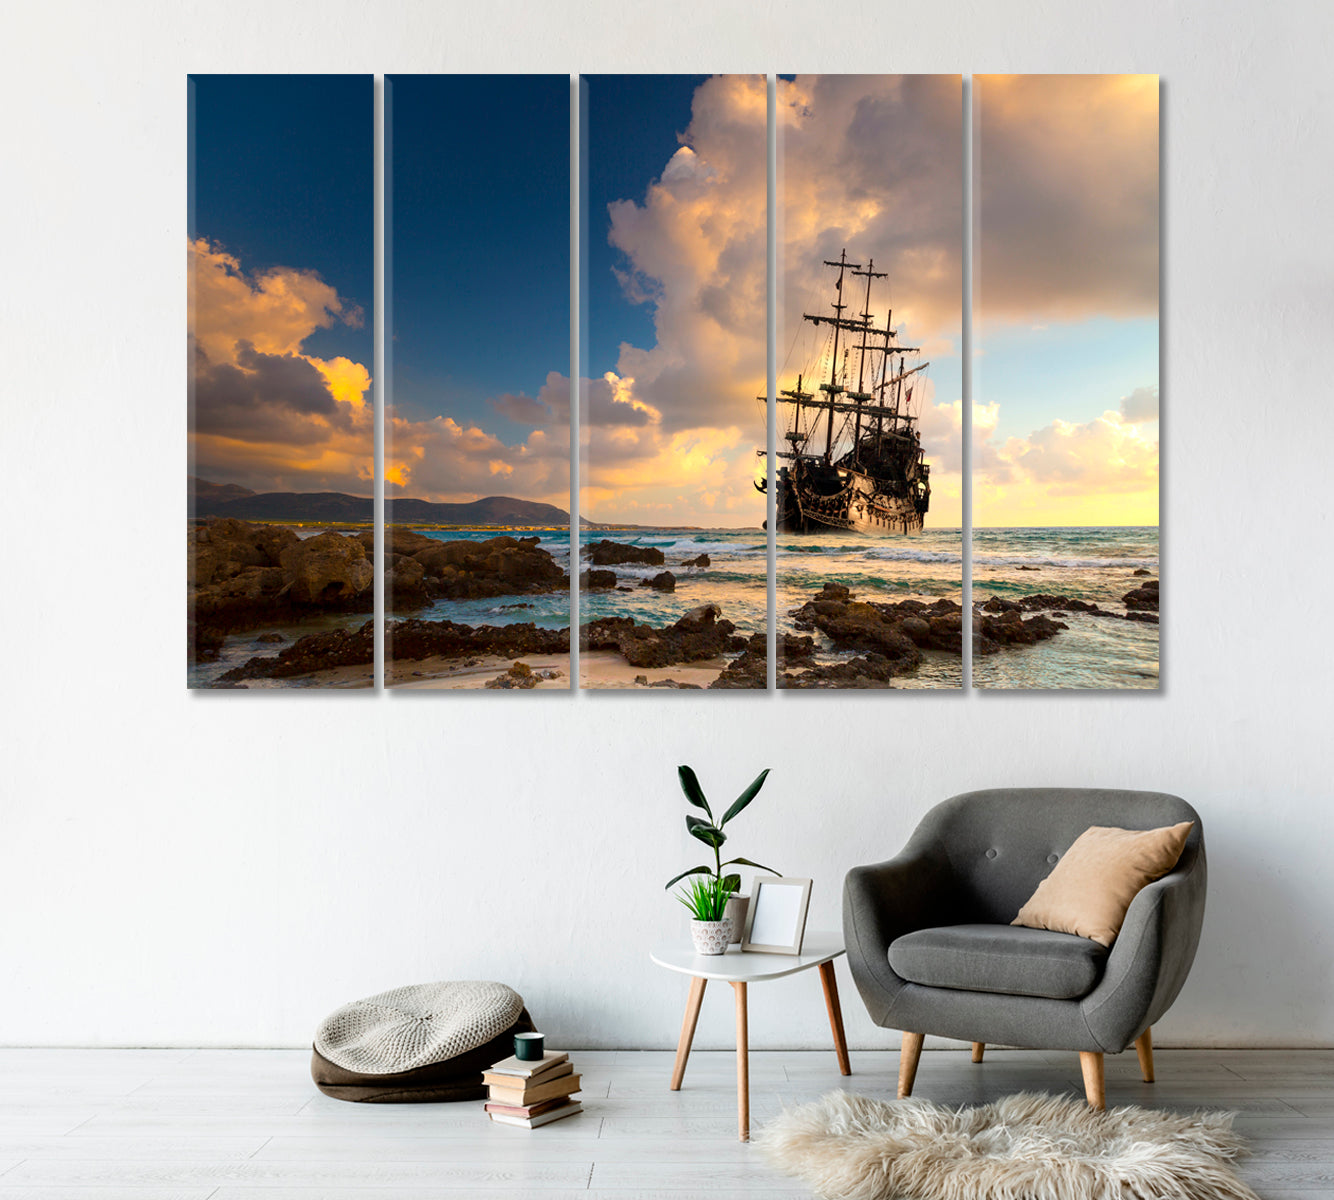 Old Pirate Ship at the Open Sea in Sunset Canvas Print-Canvas Print-CetArt-1 Panel-24x16 inches-CetArt